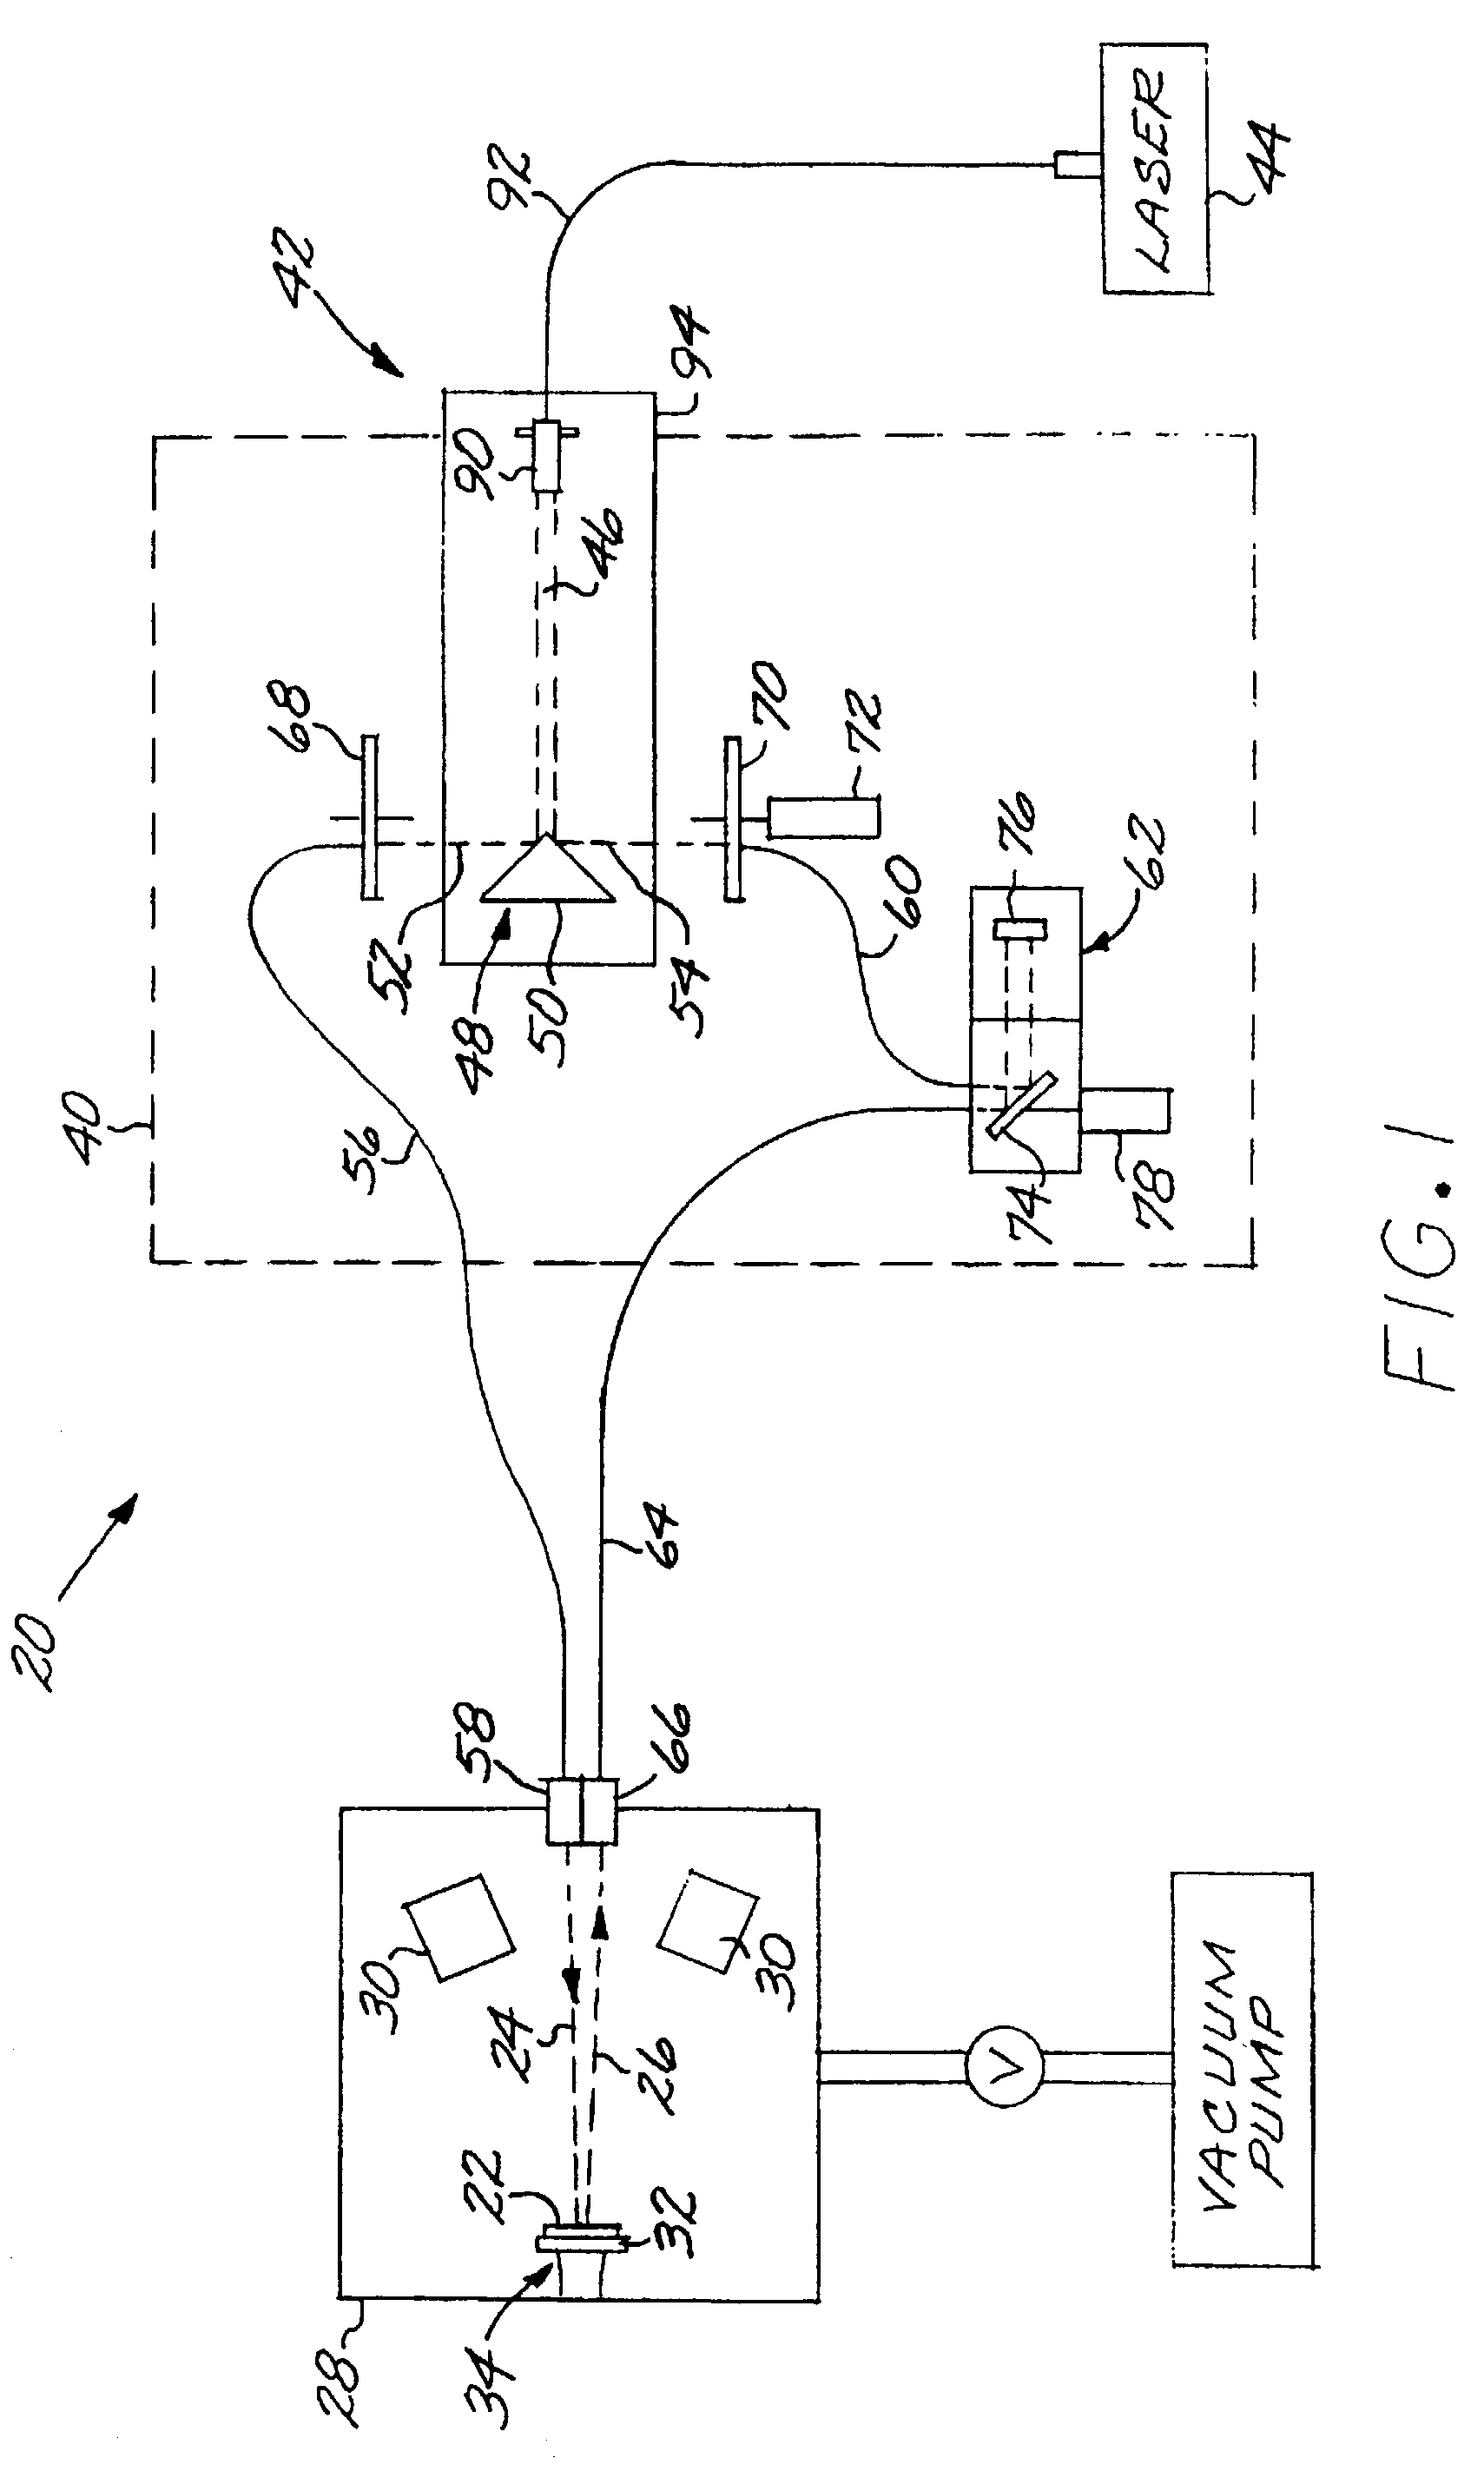 Optical measurement apparatus with laser light source